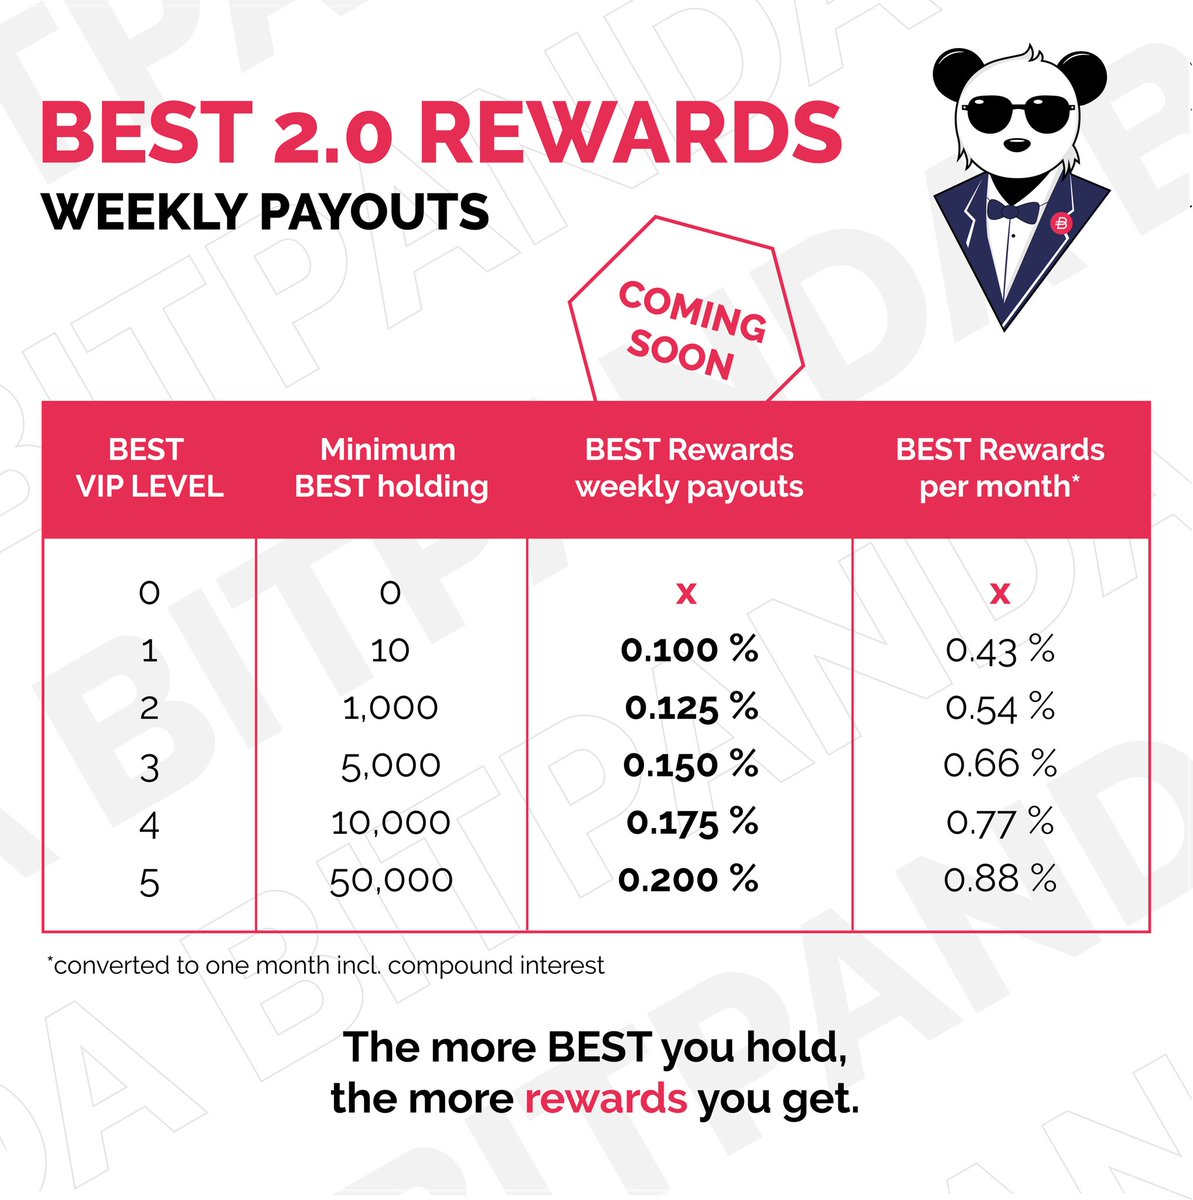 #BEST 2.0 is around the corner! 
Weekly #payouts of your #rewards up to 0.2 %! No lock-in needed! Just hodling it in your #wallet on @bitpanda.

Do you get that much from your current #savings account?

More information:
bitpanda.com/en/bitpanda-ec…

#nolockin #investment #crypto